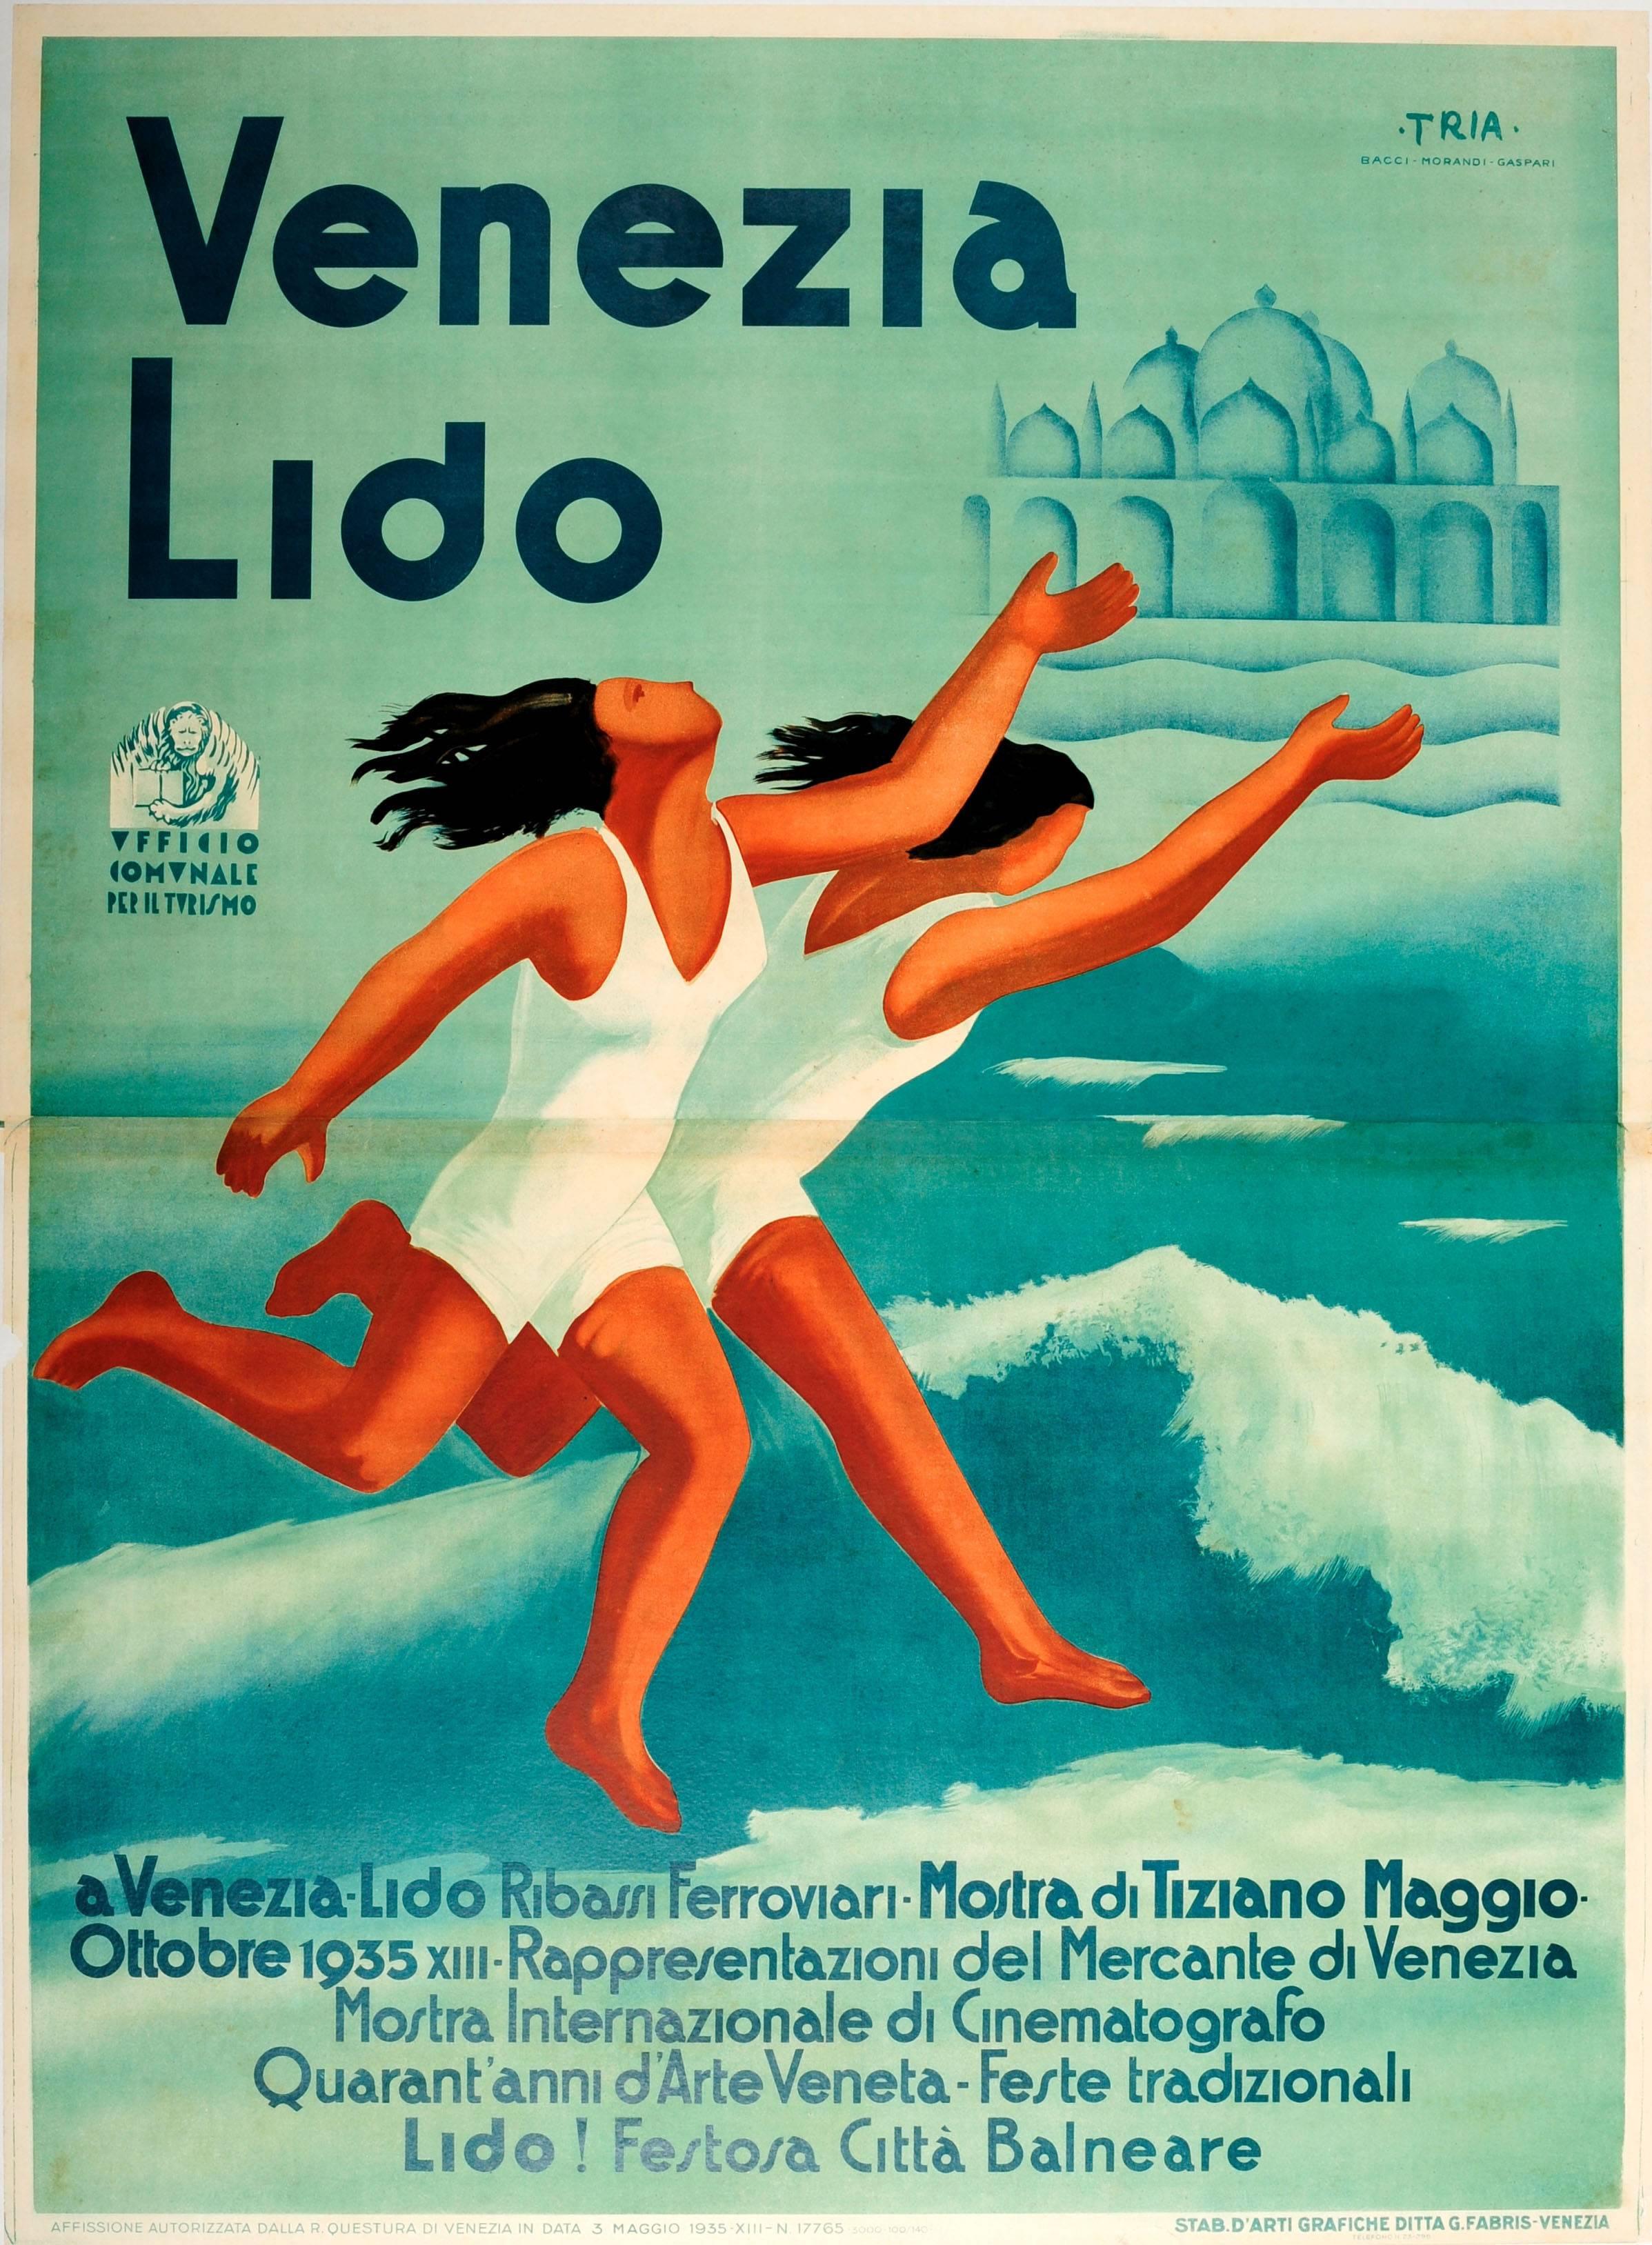 TRIA Print - Original Vintage Poster For The 1935 Art And Film Festival Events At Venice Lido